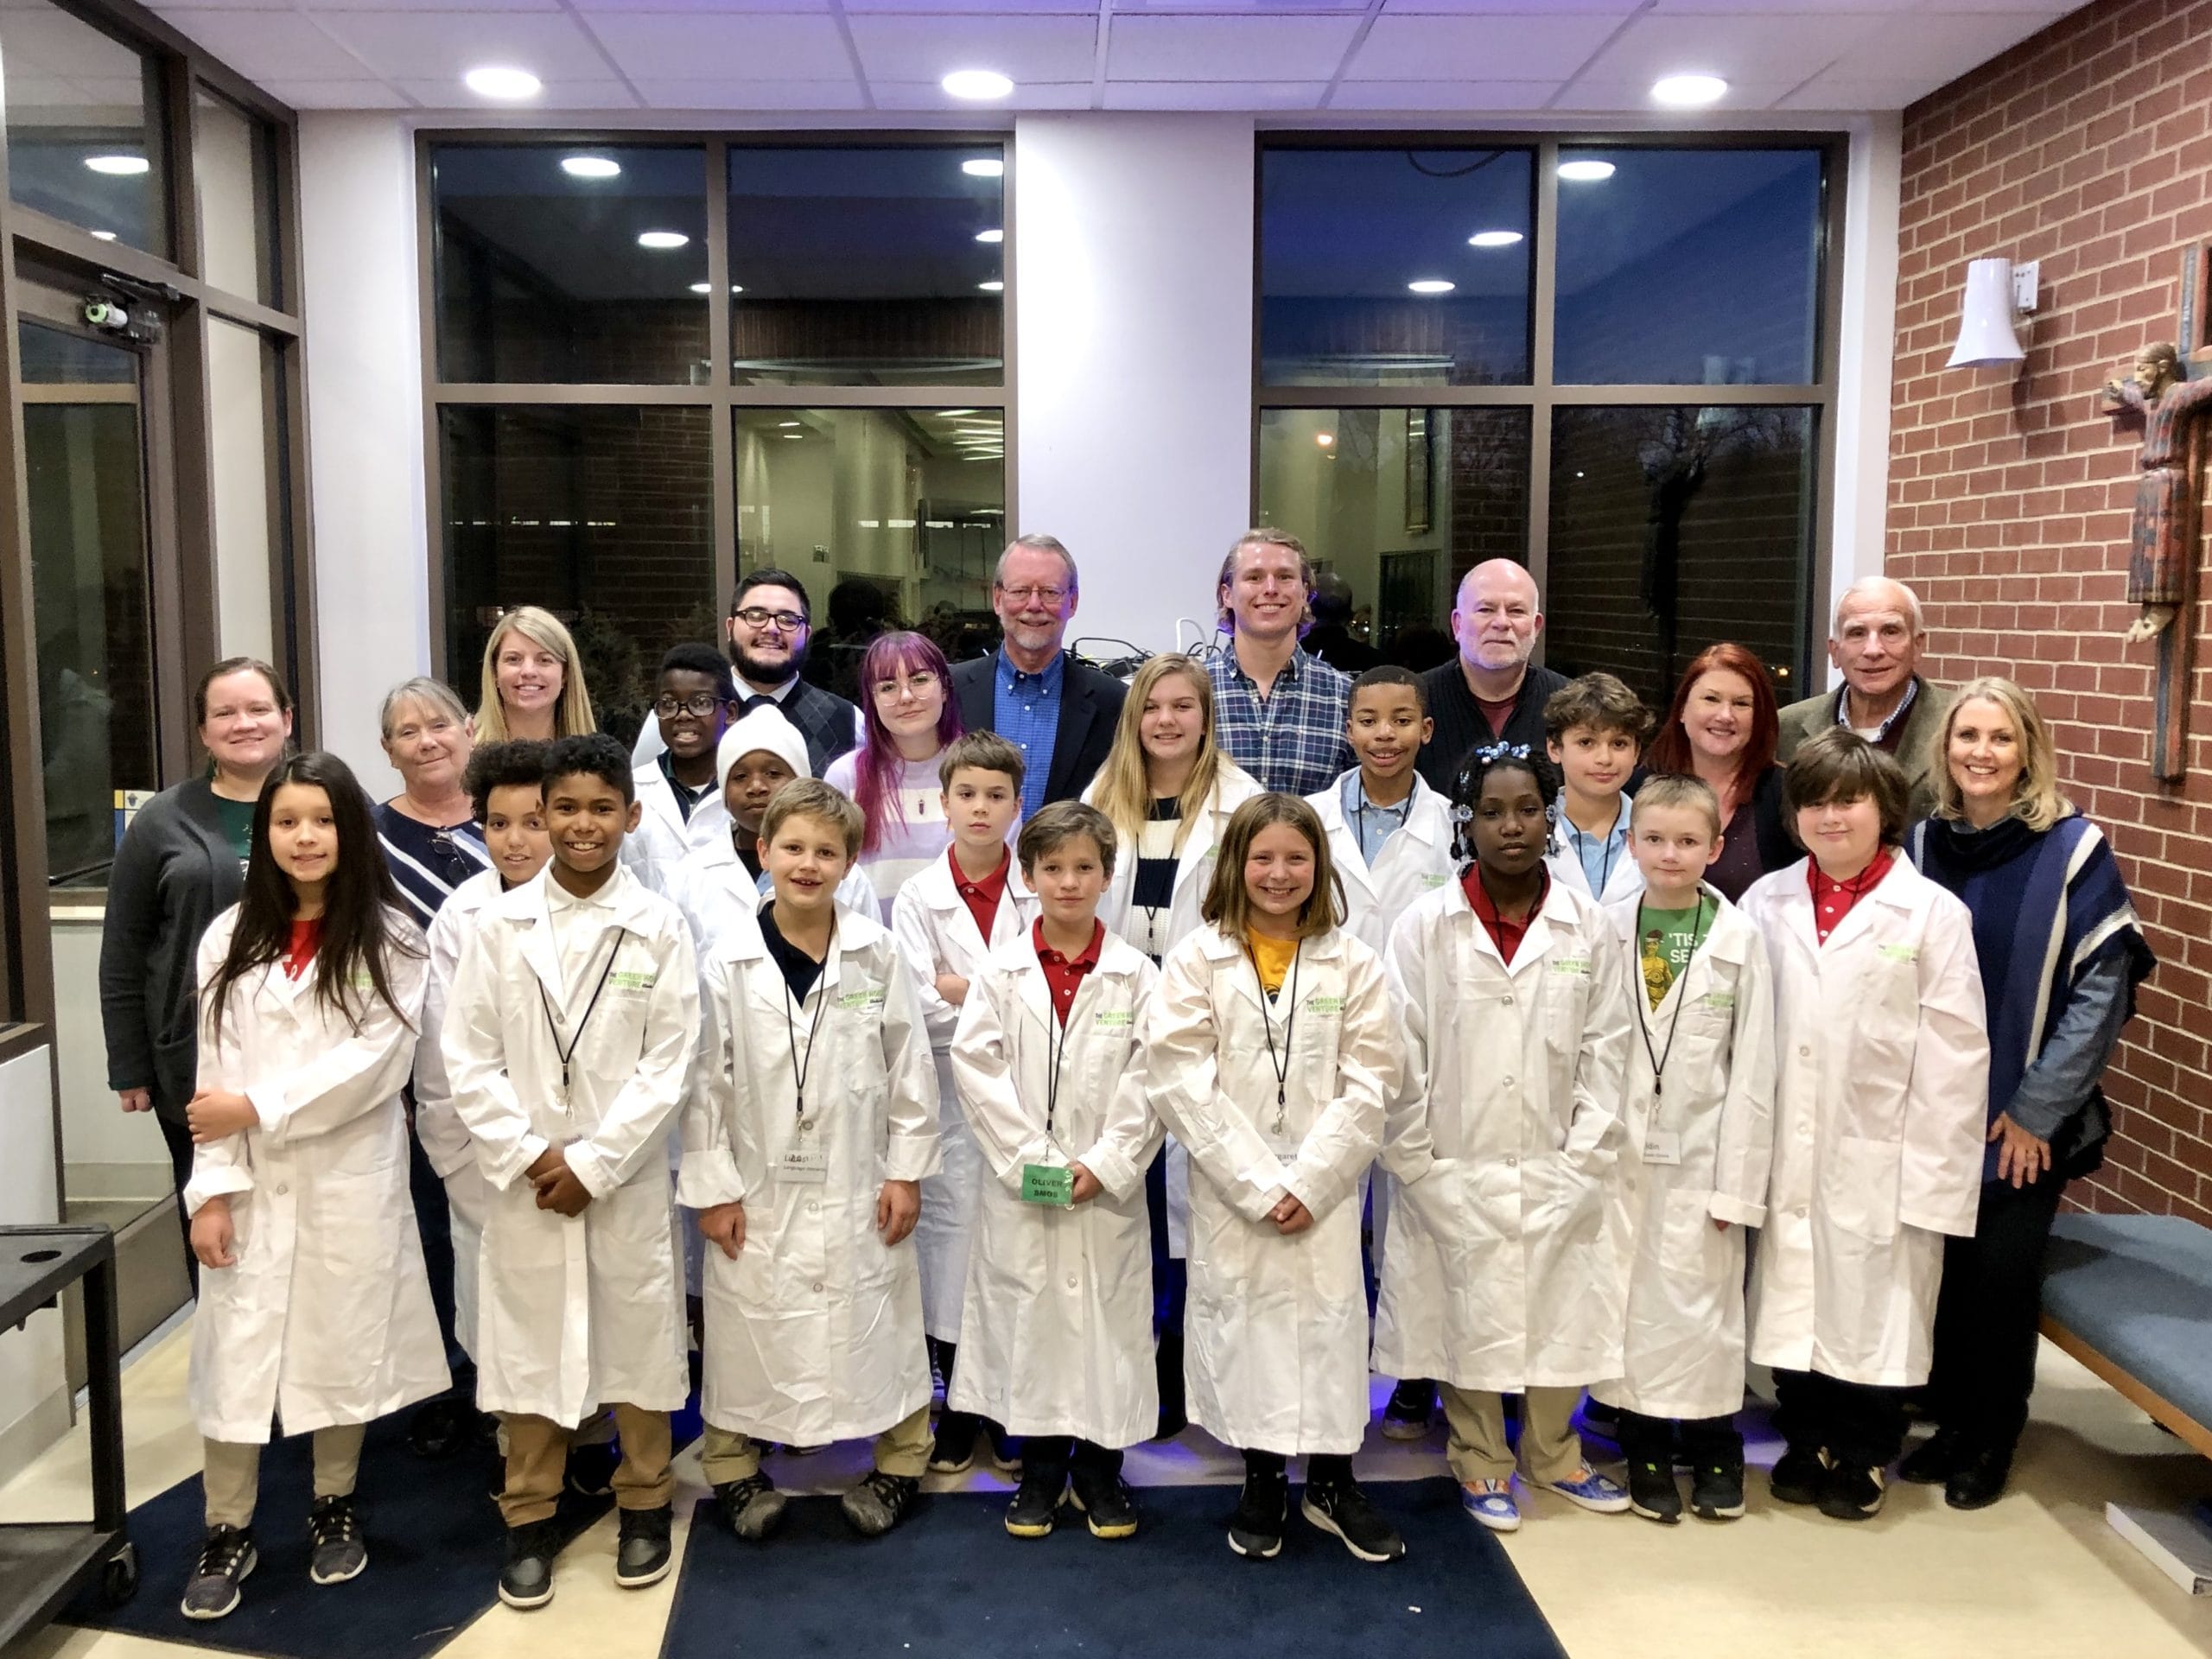 Group Picture of GHV staff and students wearing lab coats